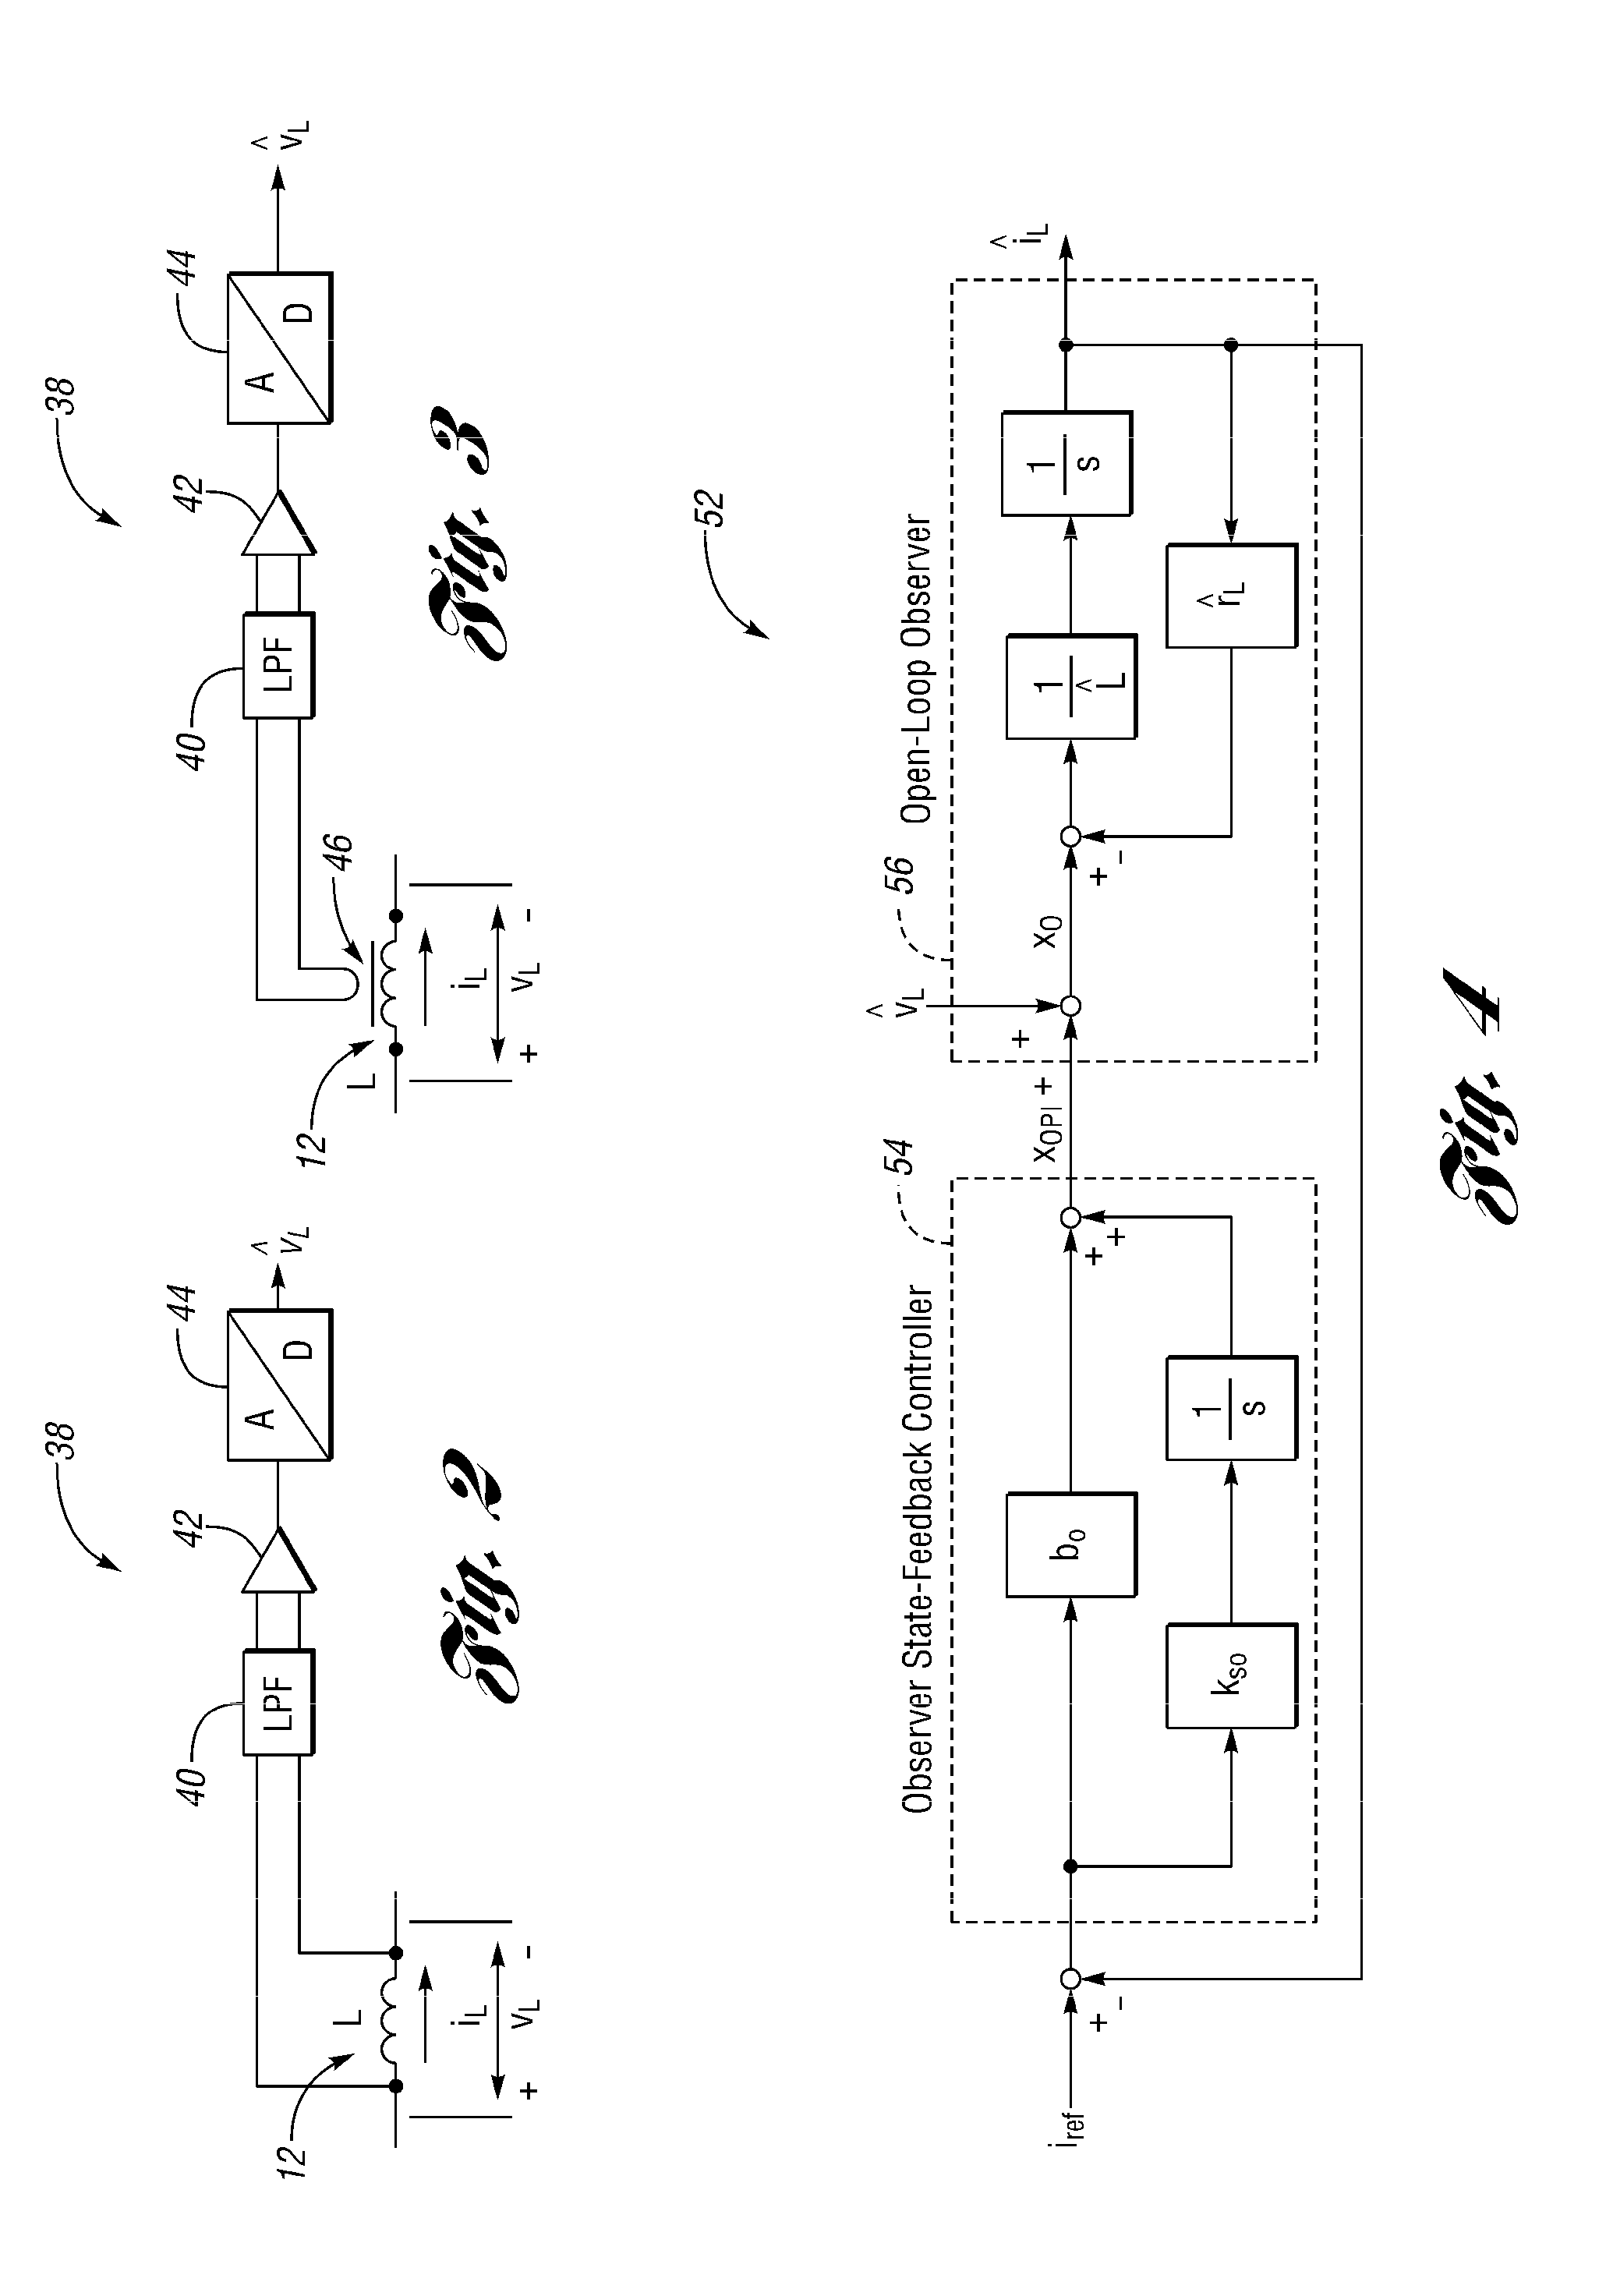 Method and system for determining an operating characteristic associated with an inductor in a power converter system